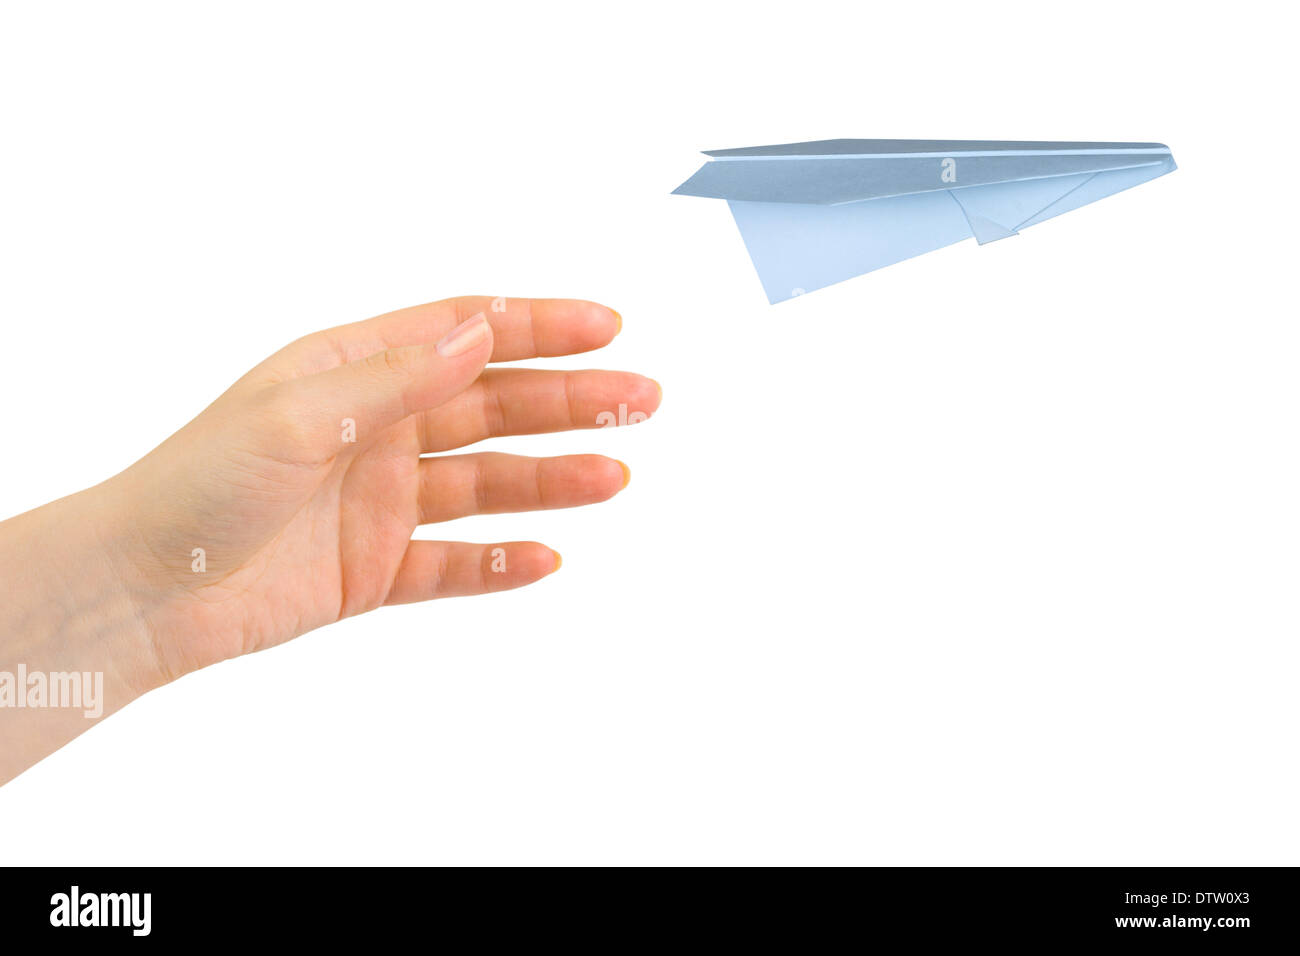 Hand and flying money plane Stock Photo